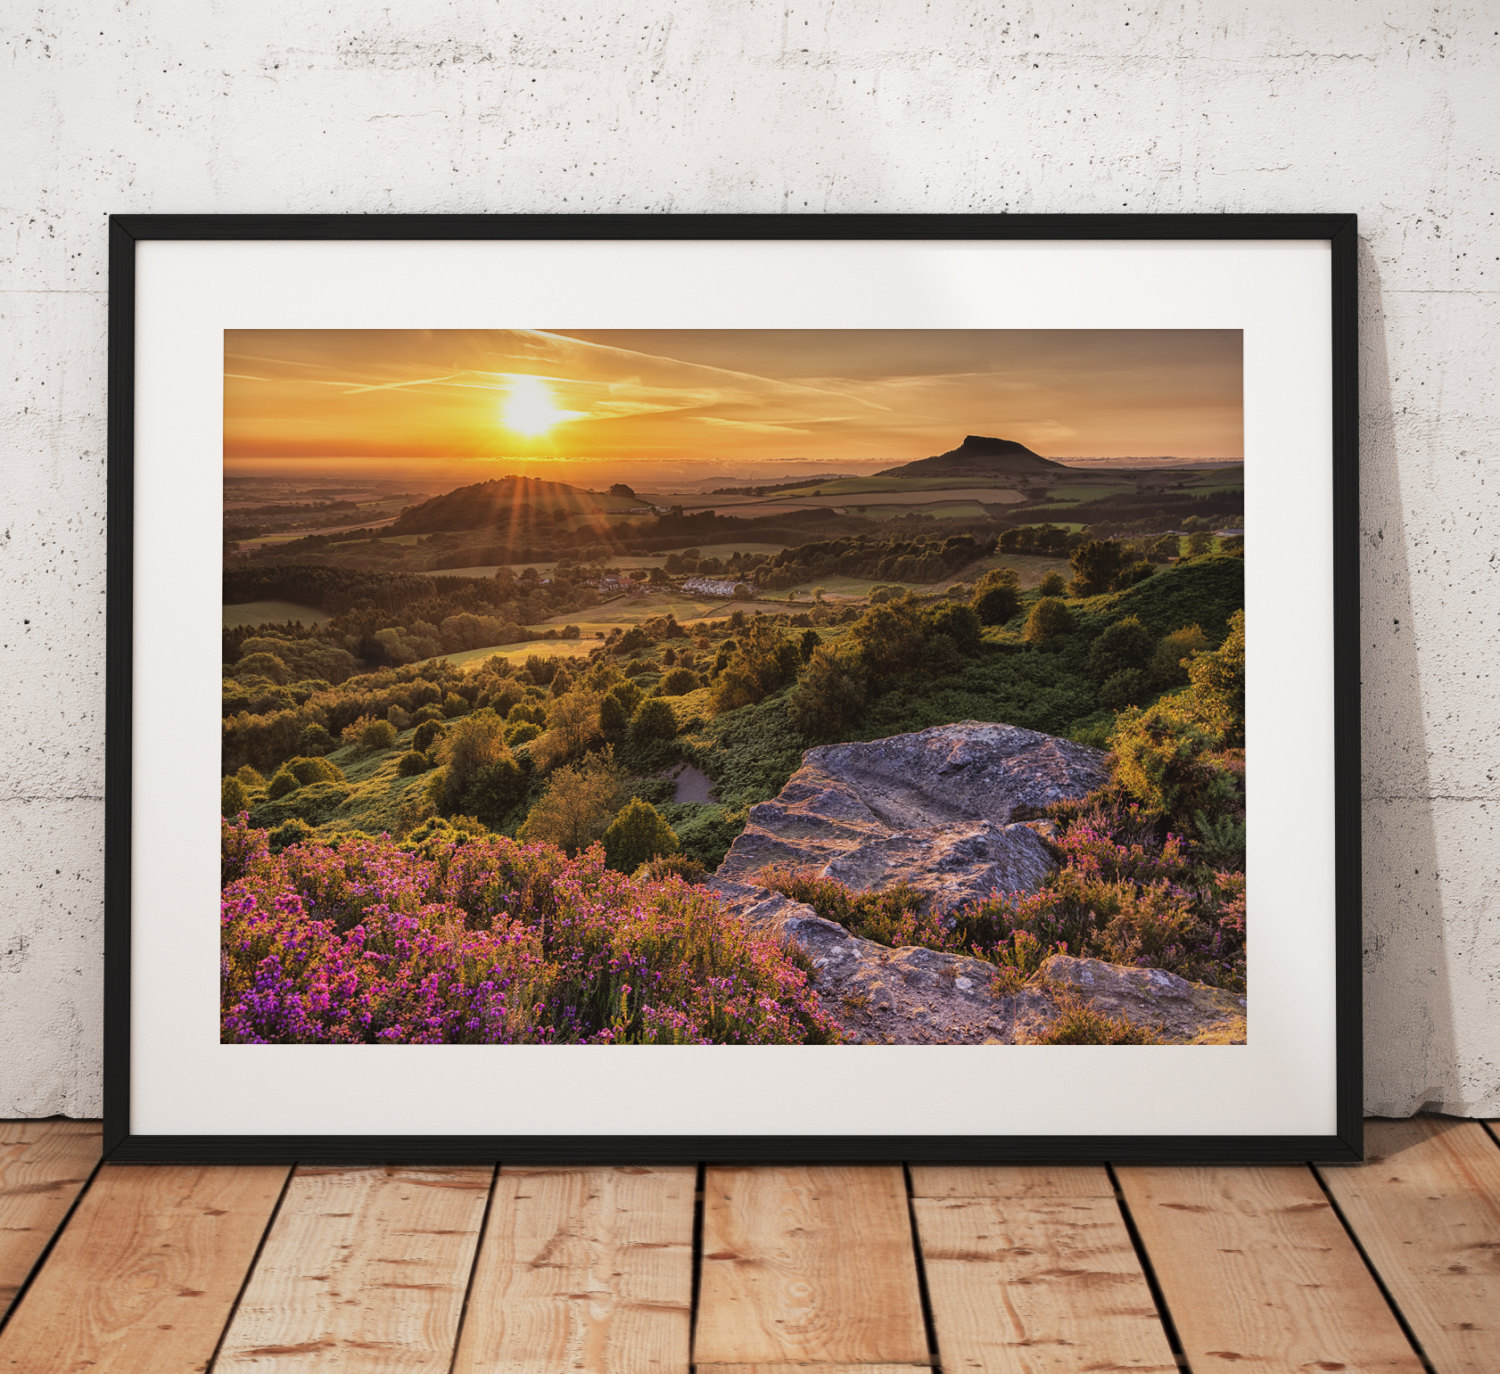 Sunset Photography Roseberry Topping. North York Moors, England. Landscape Photography. Mounted print. Wall Art.